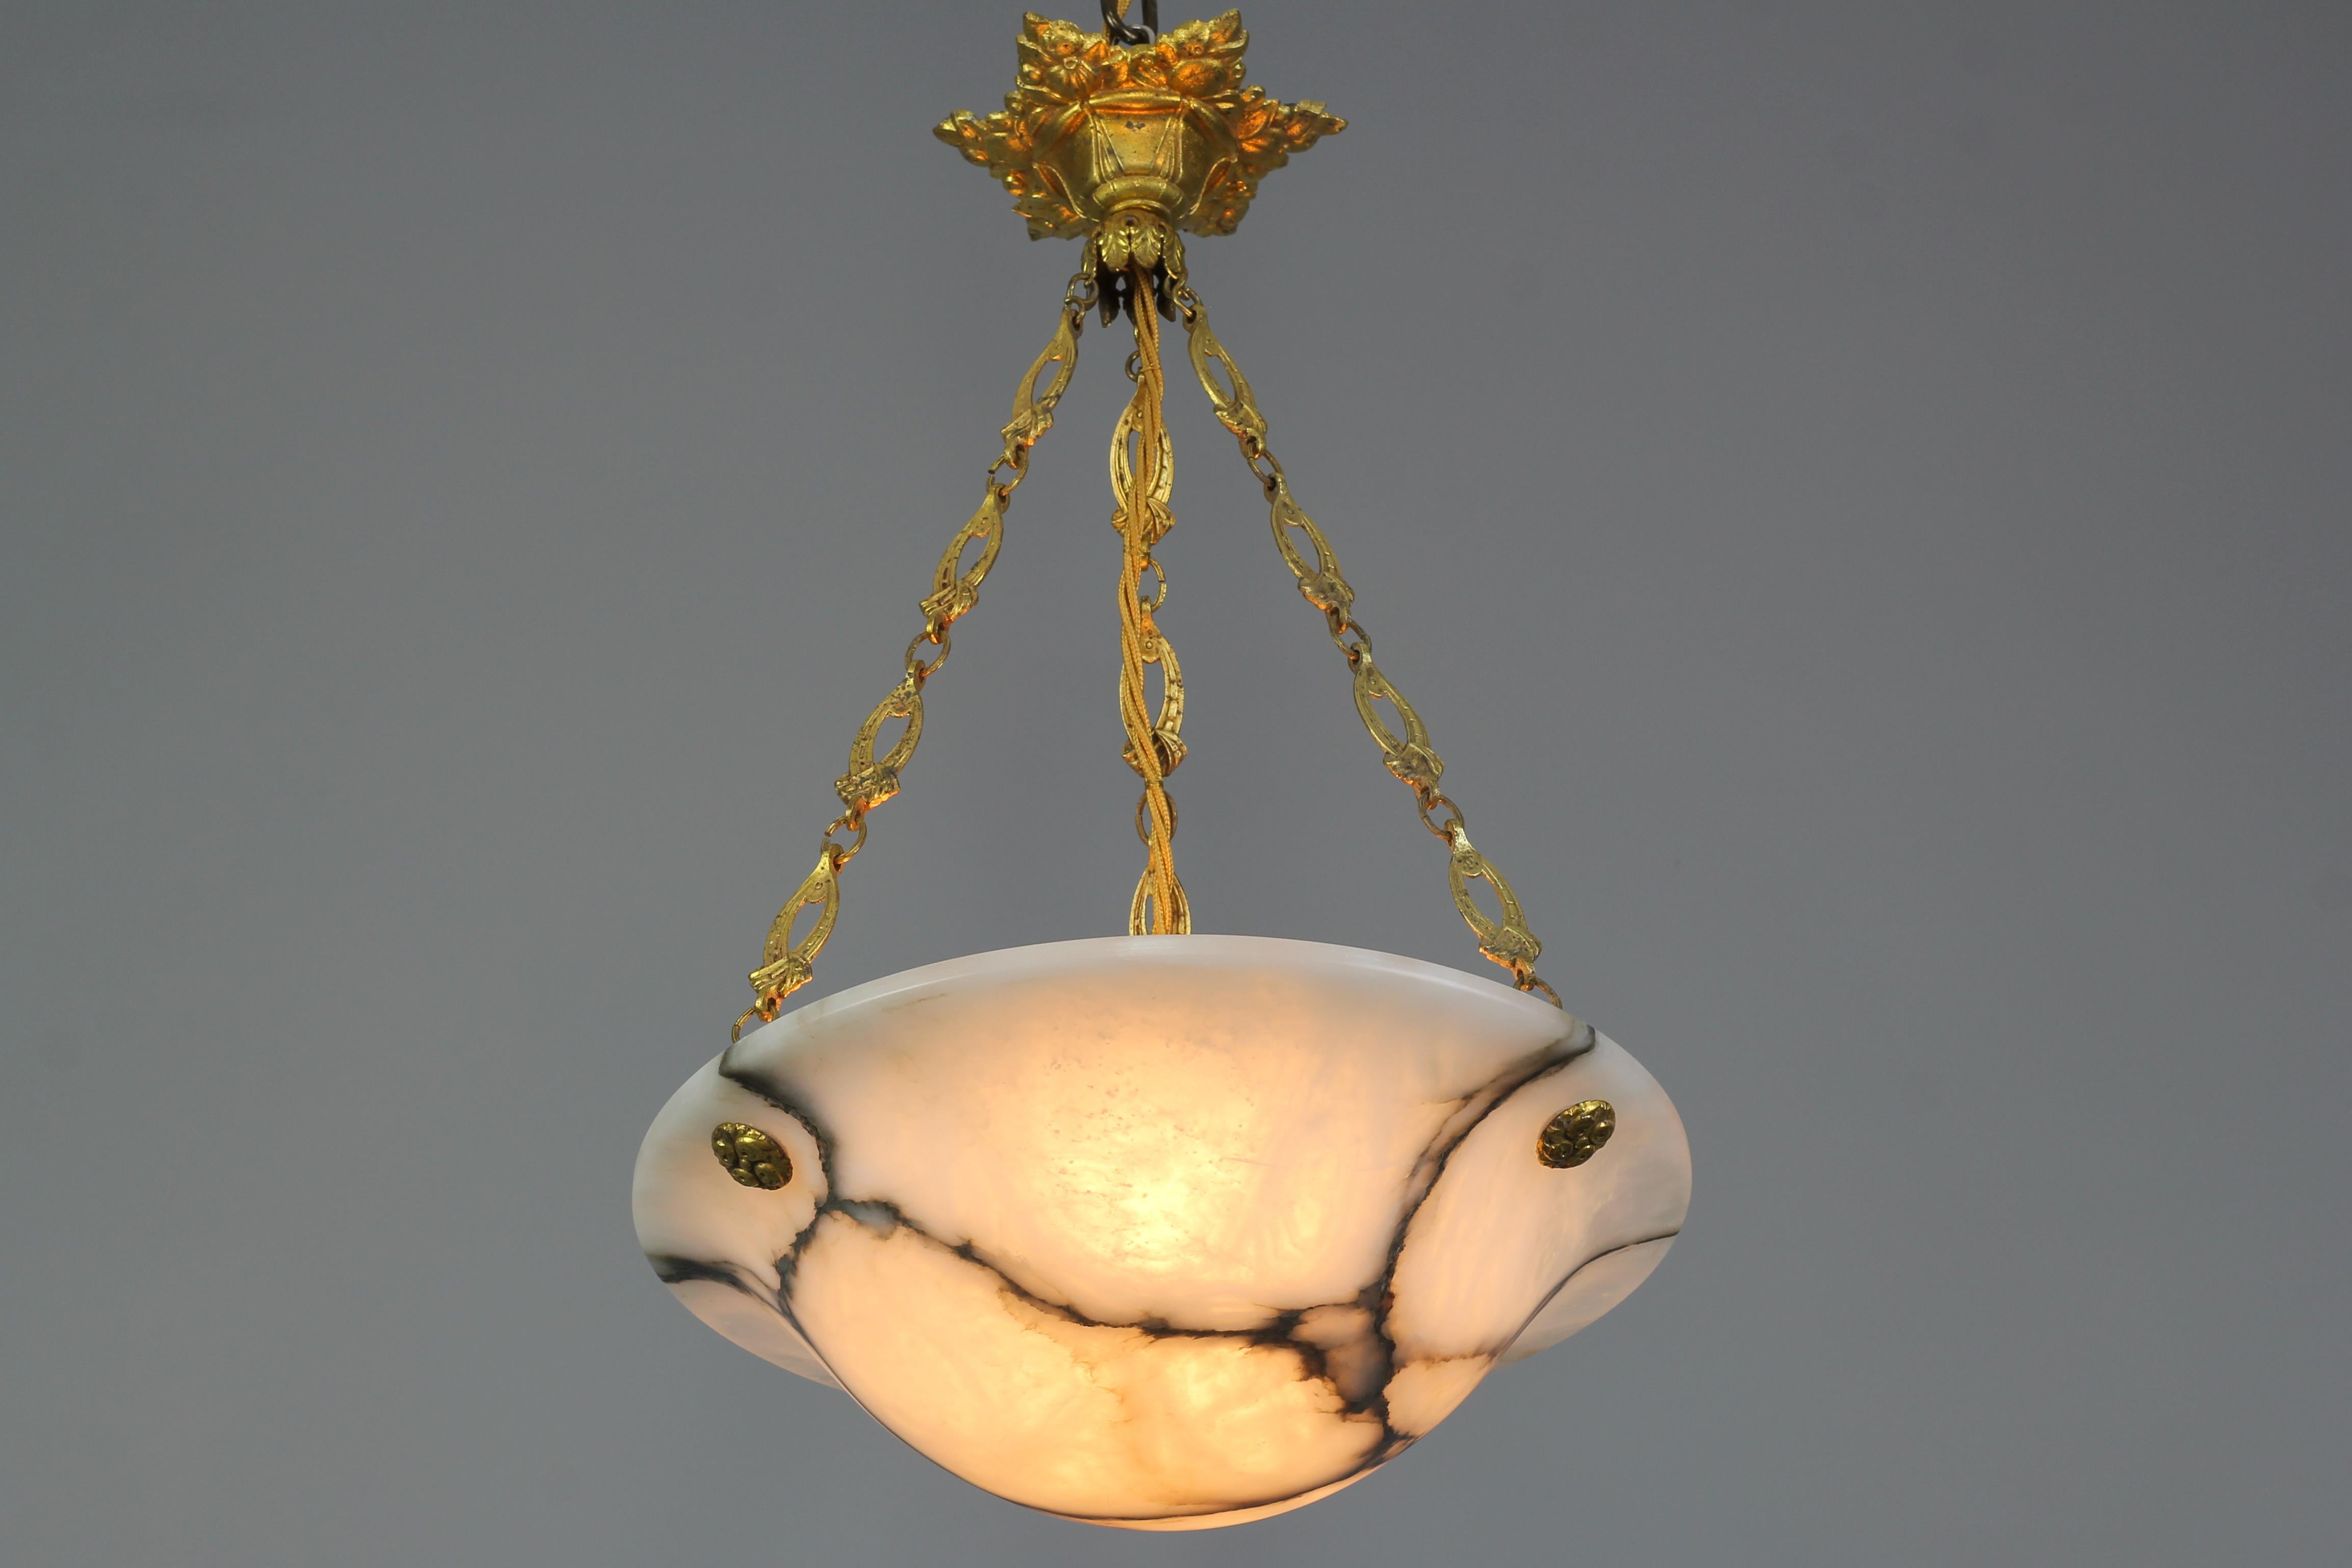 A refined Art Deco white alabaster pendant ceiling light fixture with dark brown and black veins. France, 1930s. This masterfully carved and beautifully veined one-piece alabaster bowl is suspended by three ornate bronze chains and a richly